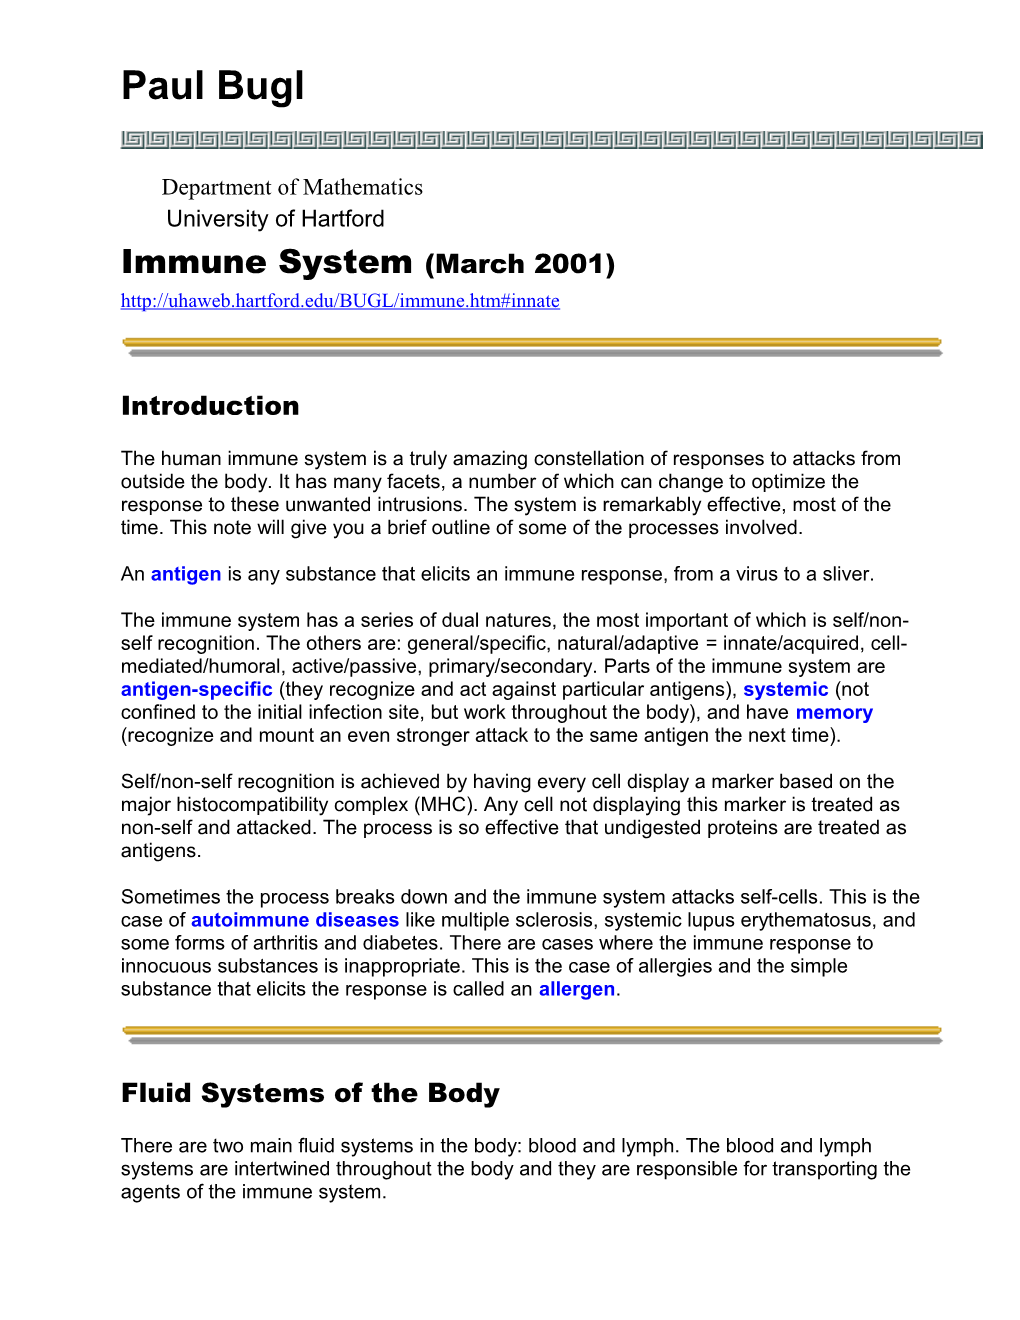 Paul Bugl, Introduction to Immune System1